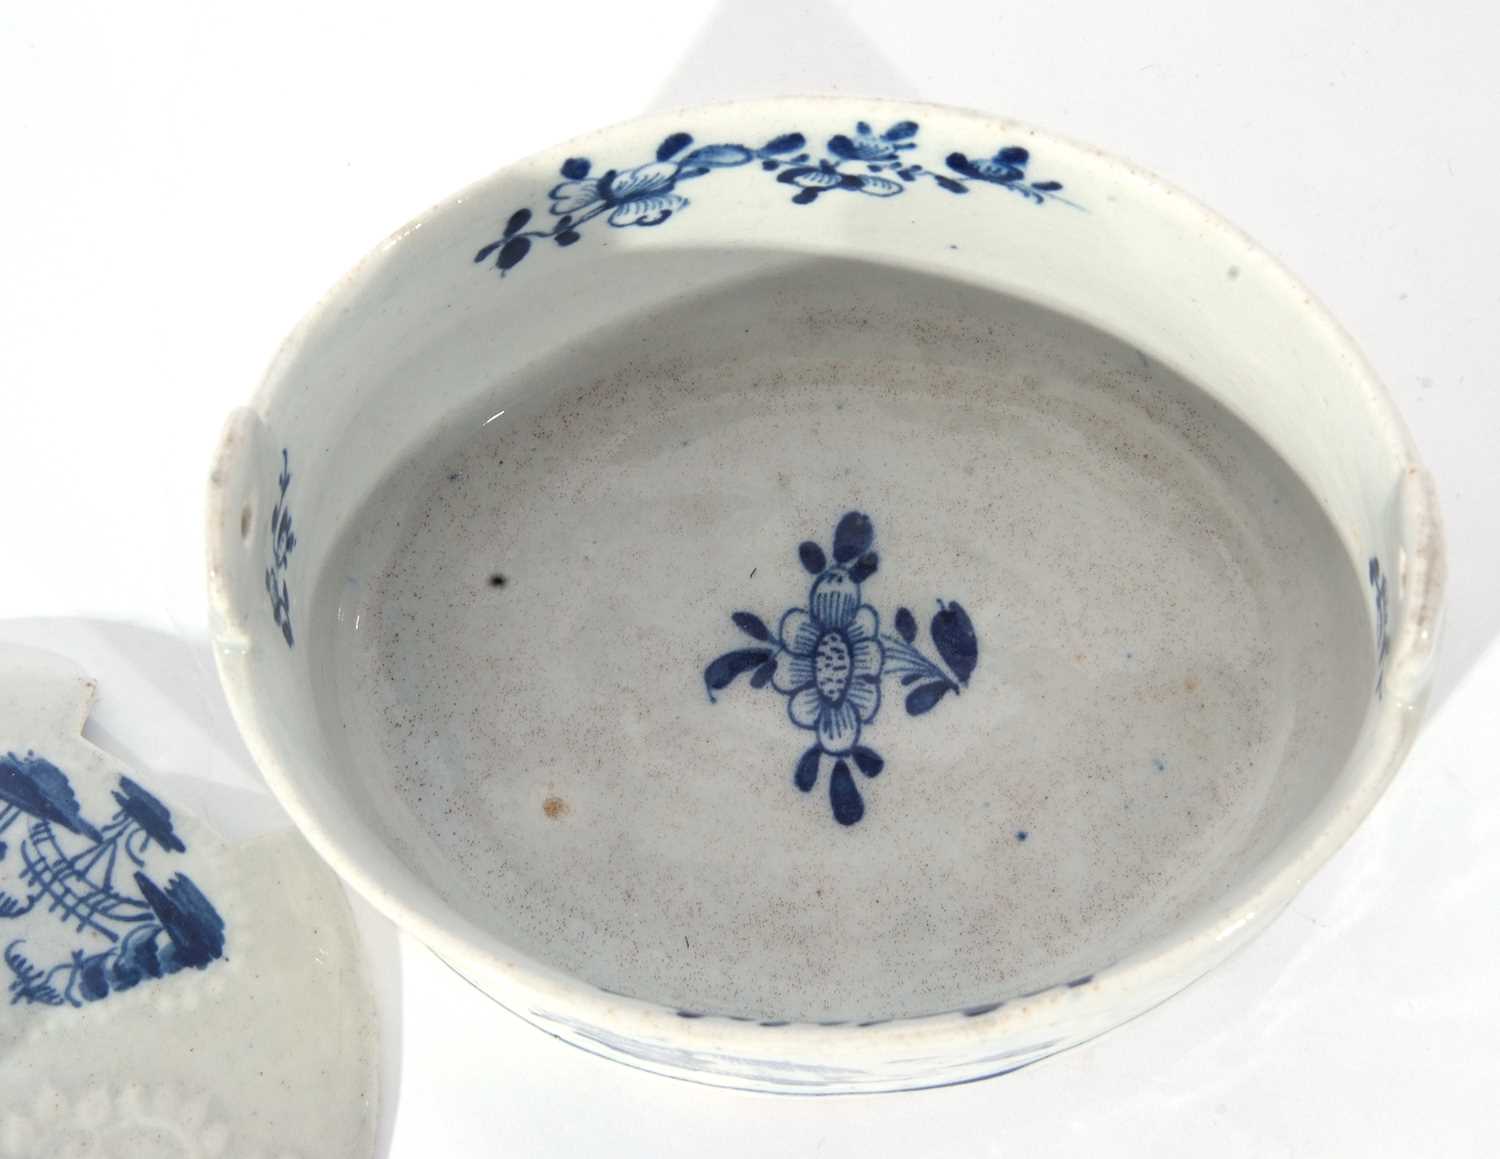 Lowestoft porcelain butter tub, cover and stand circa 1765, the tub moulded with flowers enclosing - Image 12 of 14